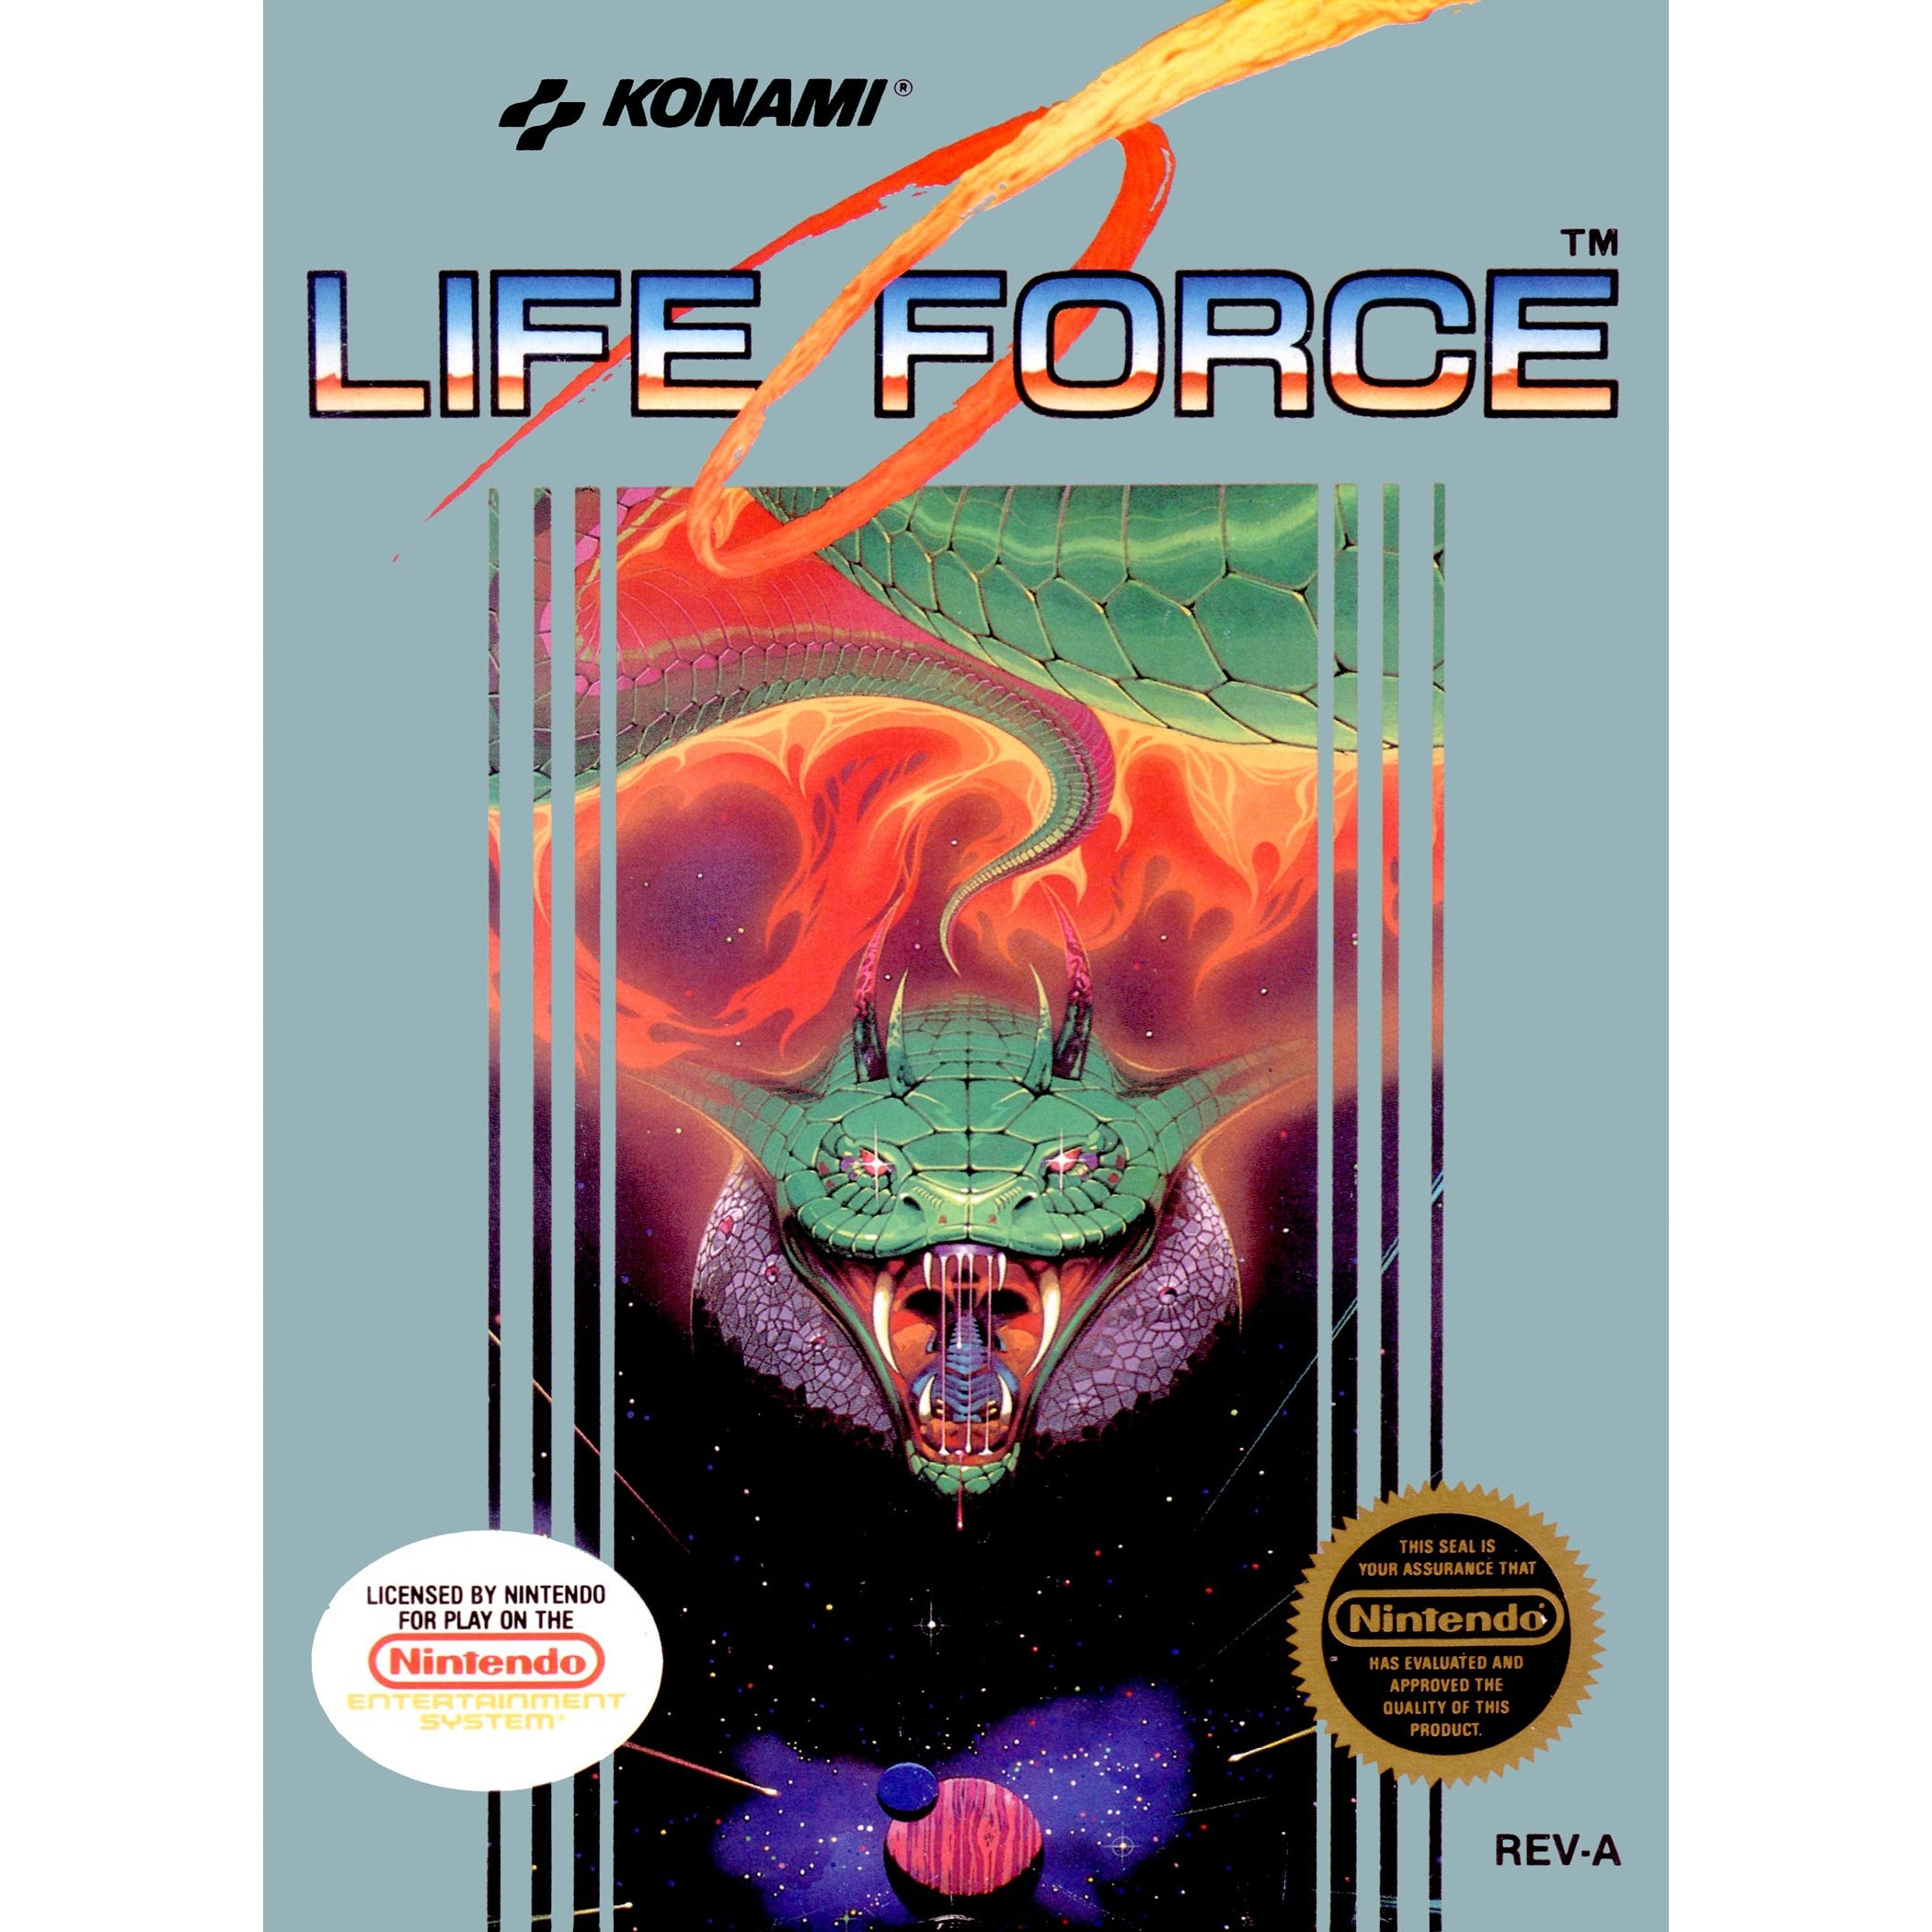 Life Force - Authentic NES Game Cartridge - YourGamingShop.com - Buy, Sell, Trade Video Games Online. 120 Day Warranty. Satisfaction Guaranteed.